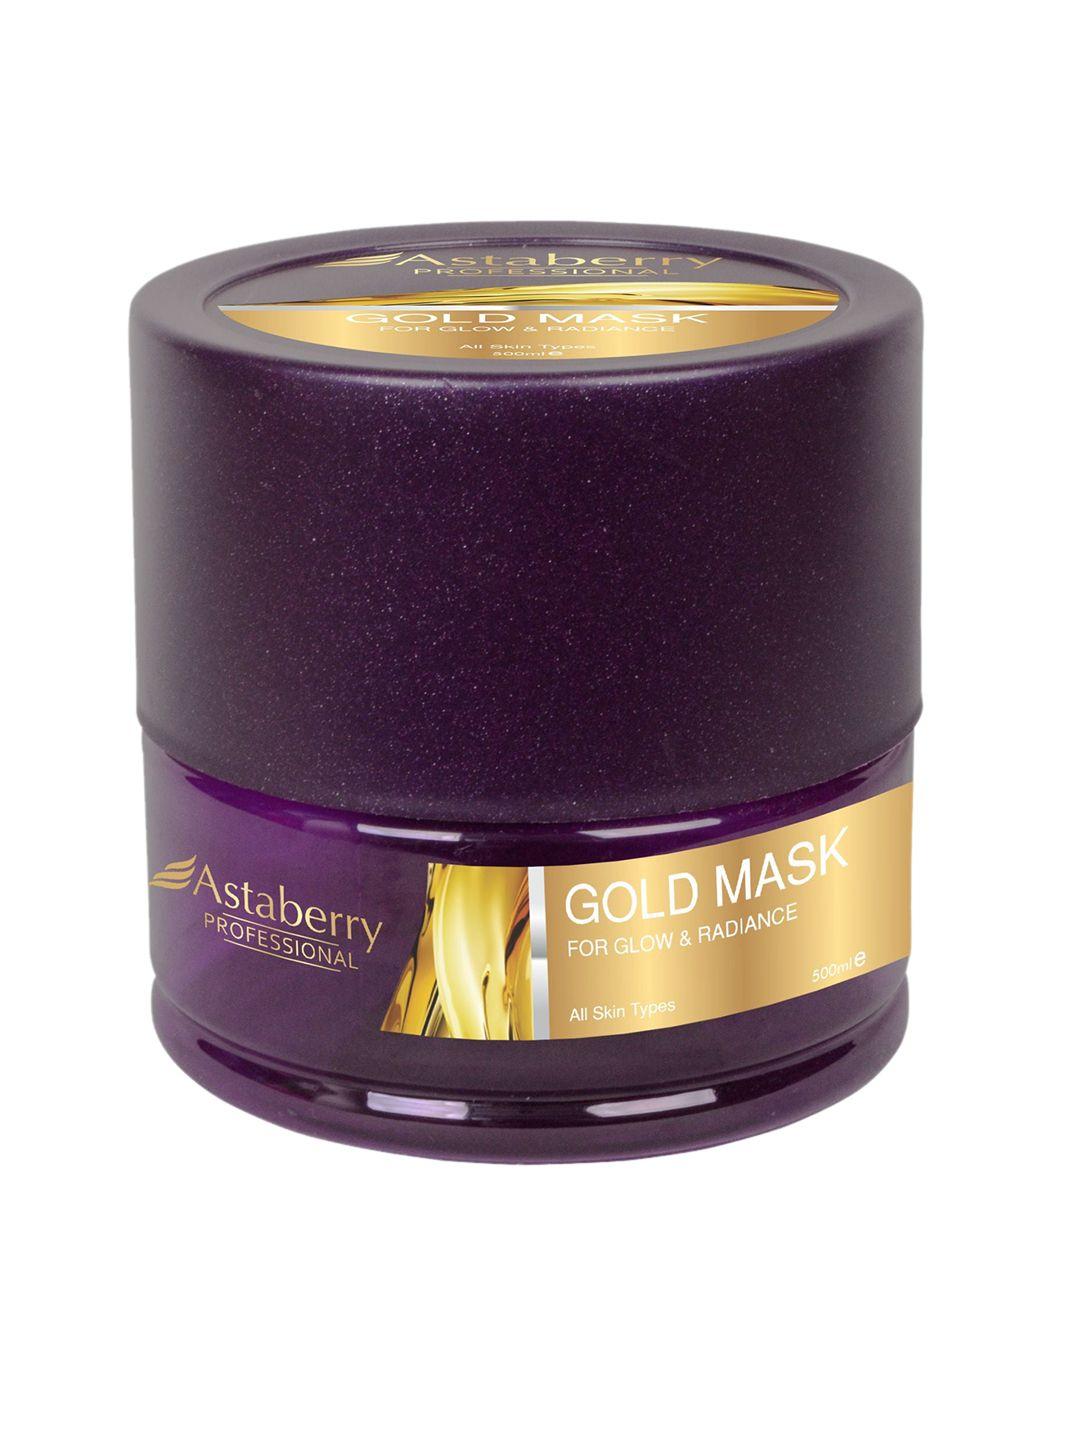 astaberry professional gold mask for glow & radiance 500 ml